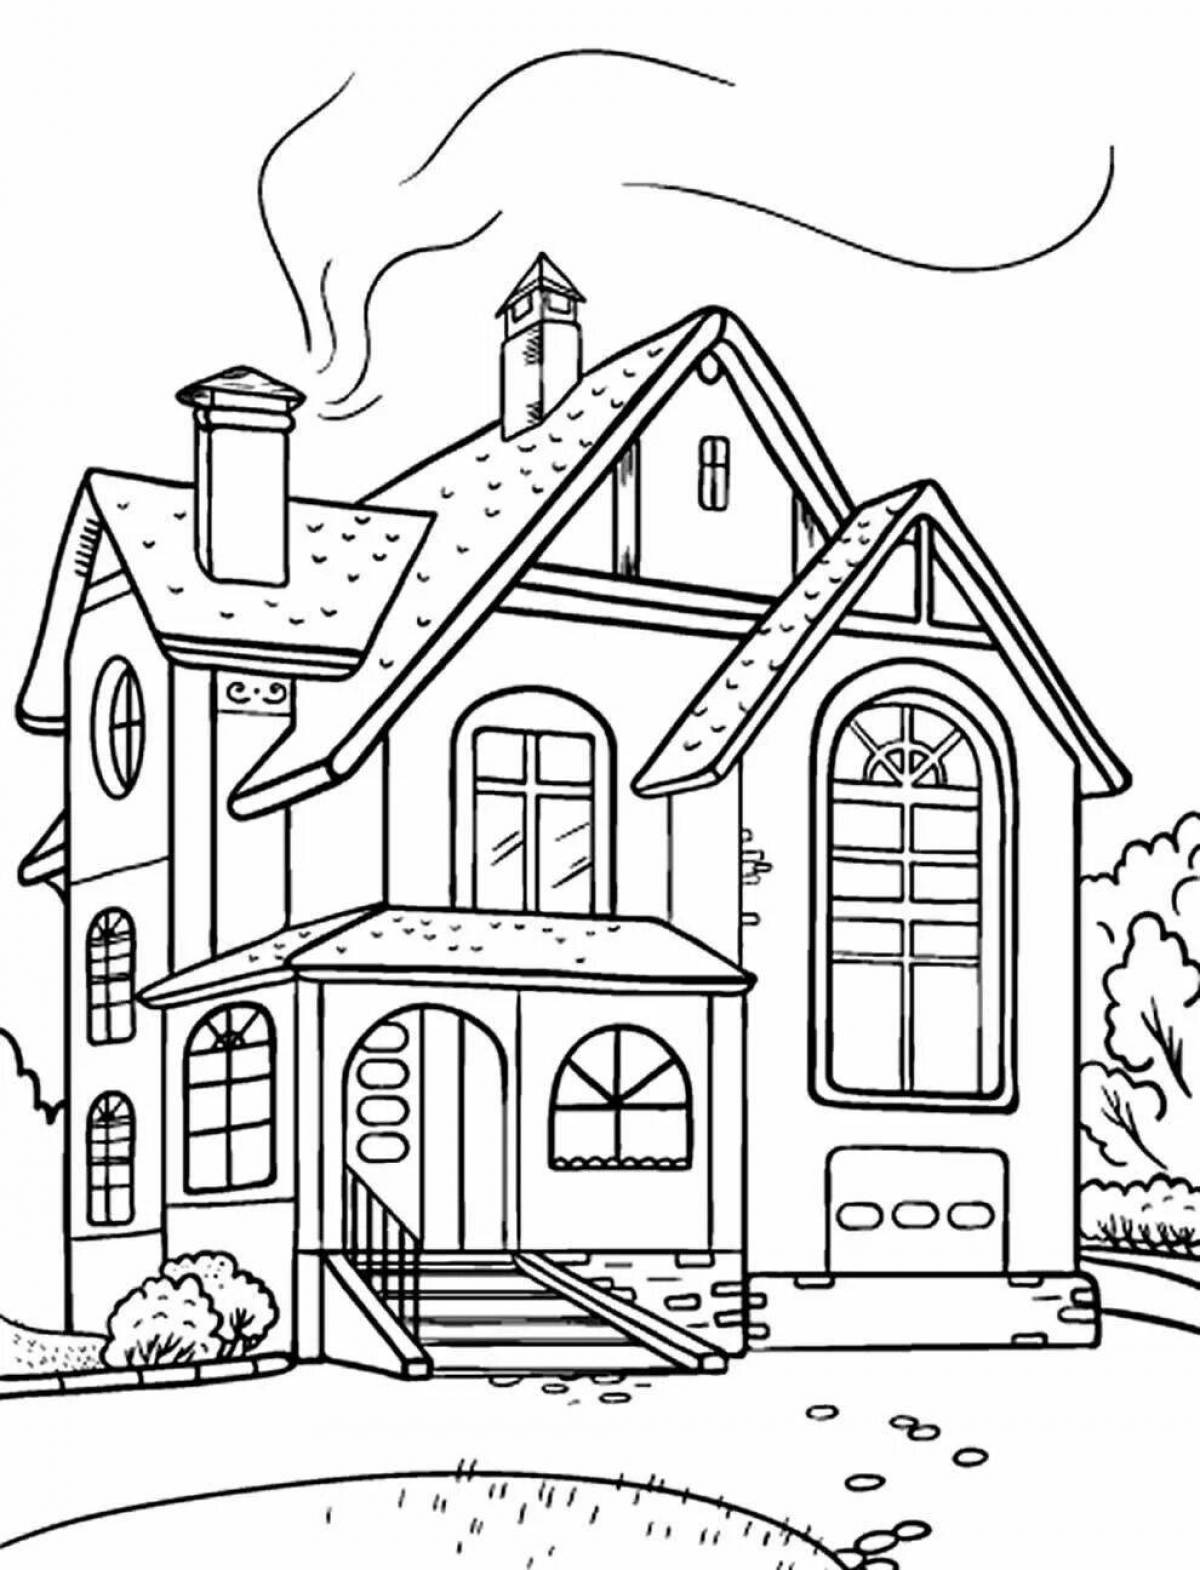 Awesome villa coloring page